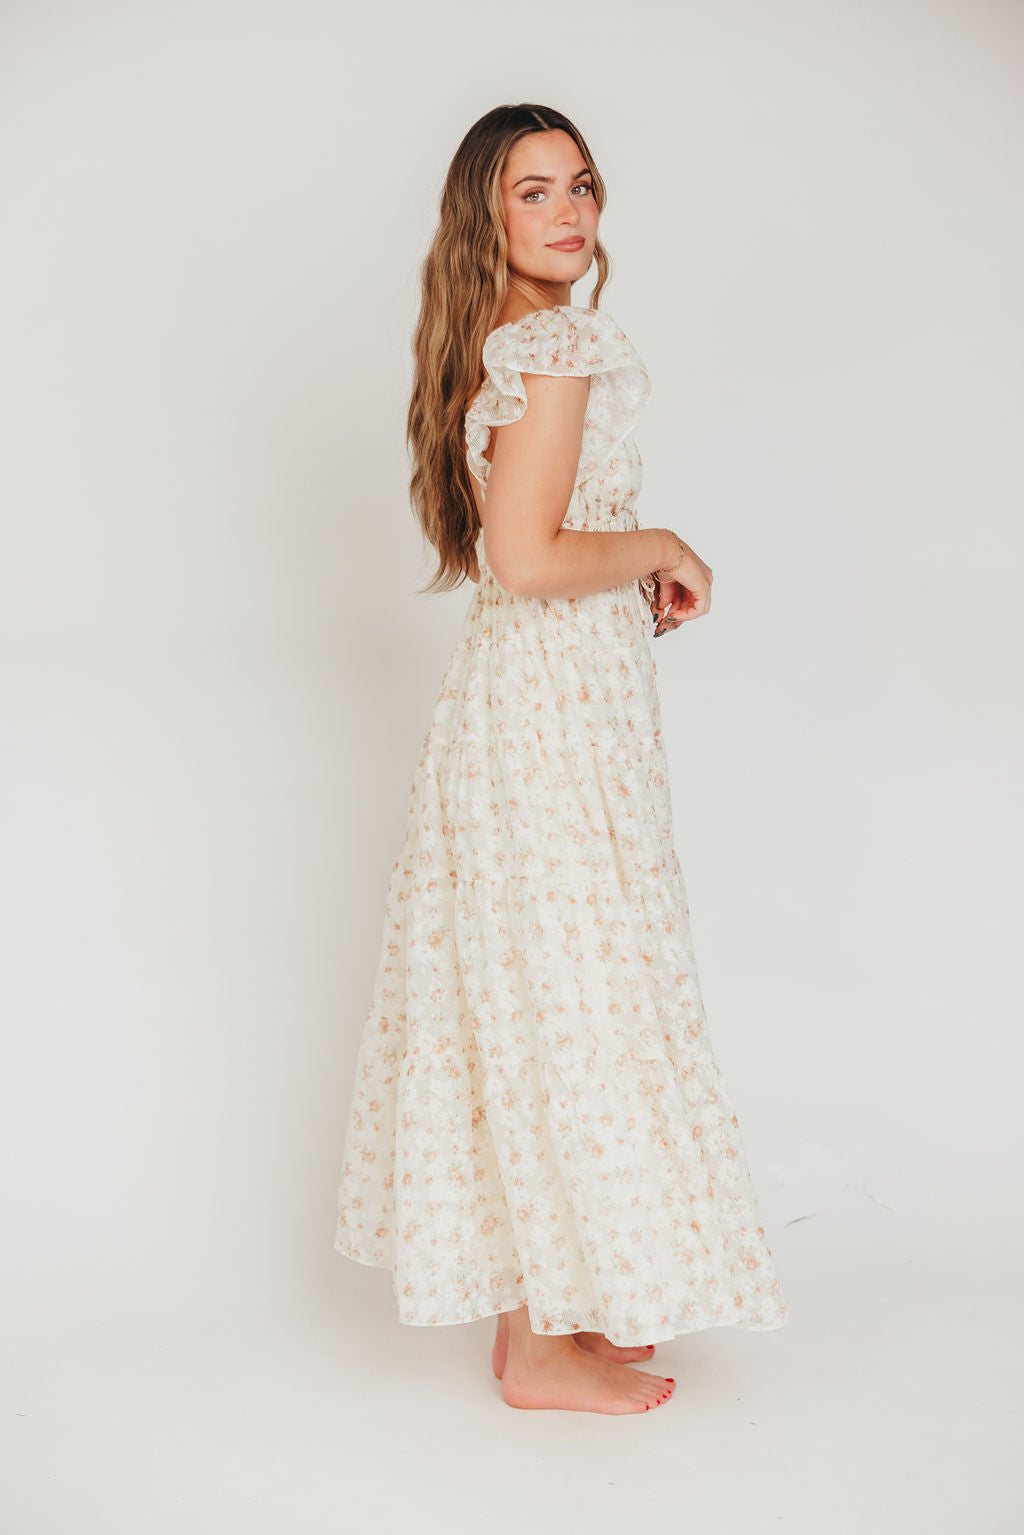 Enchanted Floral & Gingham Ruffled Maxi Dress in Cream/Peach (Restocking in May)